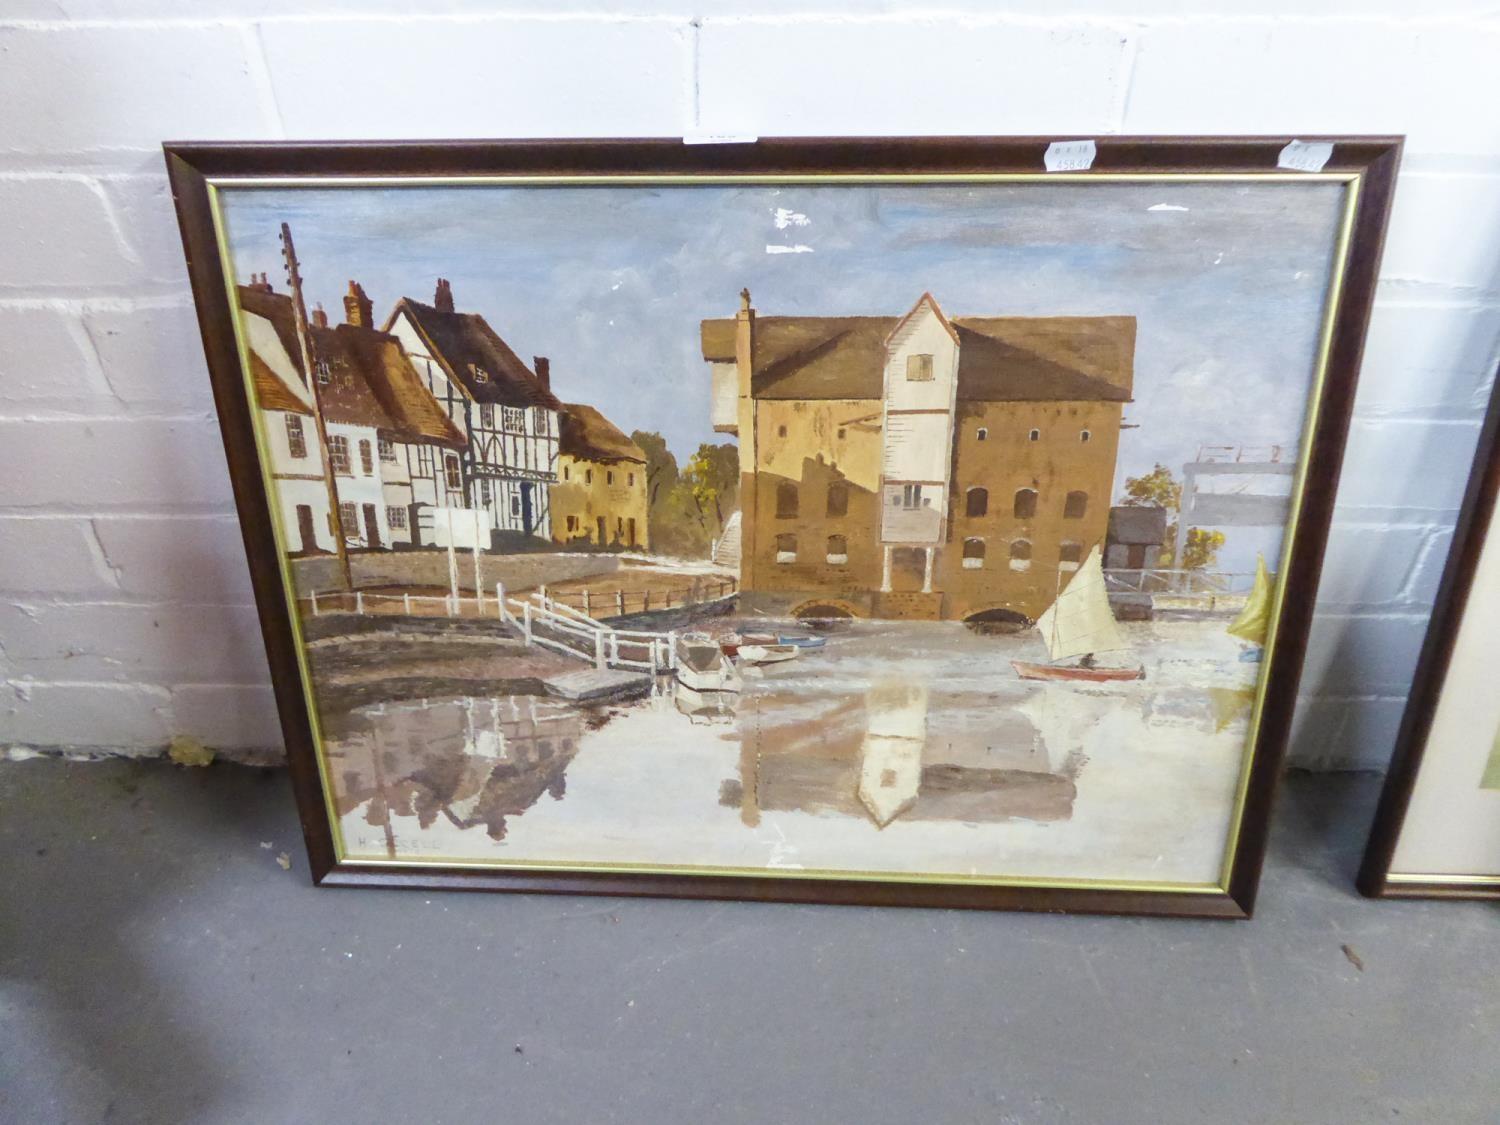 H. ORRELL OIL PAINTING ON BOARD SUFFOLK HARBOUR SCENE WITH SAILING BOAT SIGNED AND DATED 1970 18"